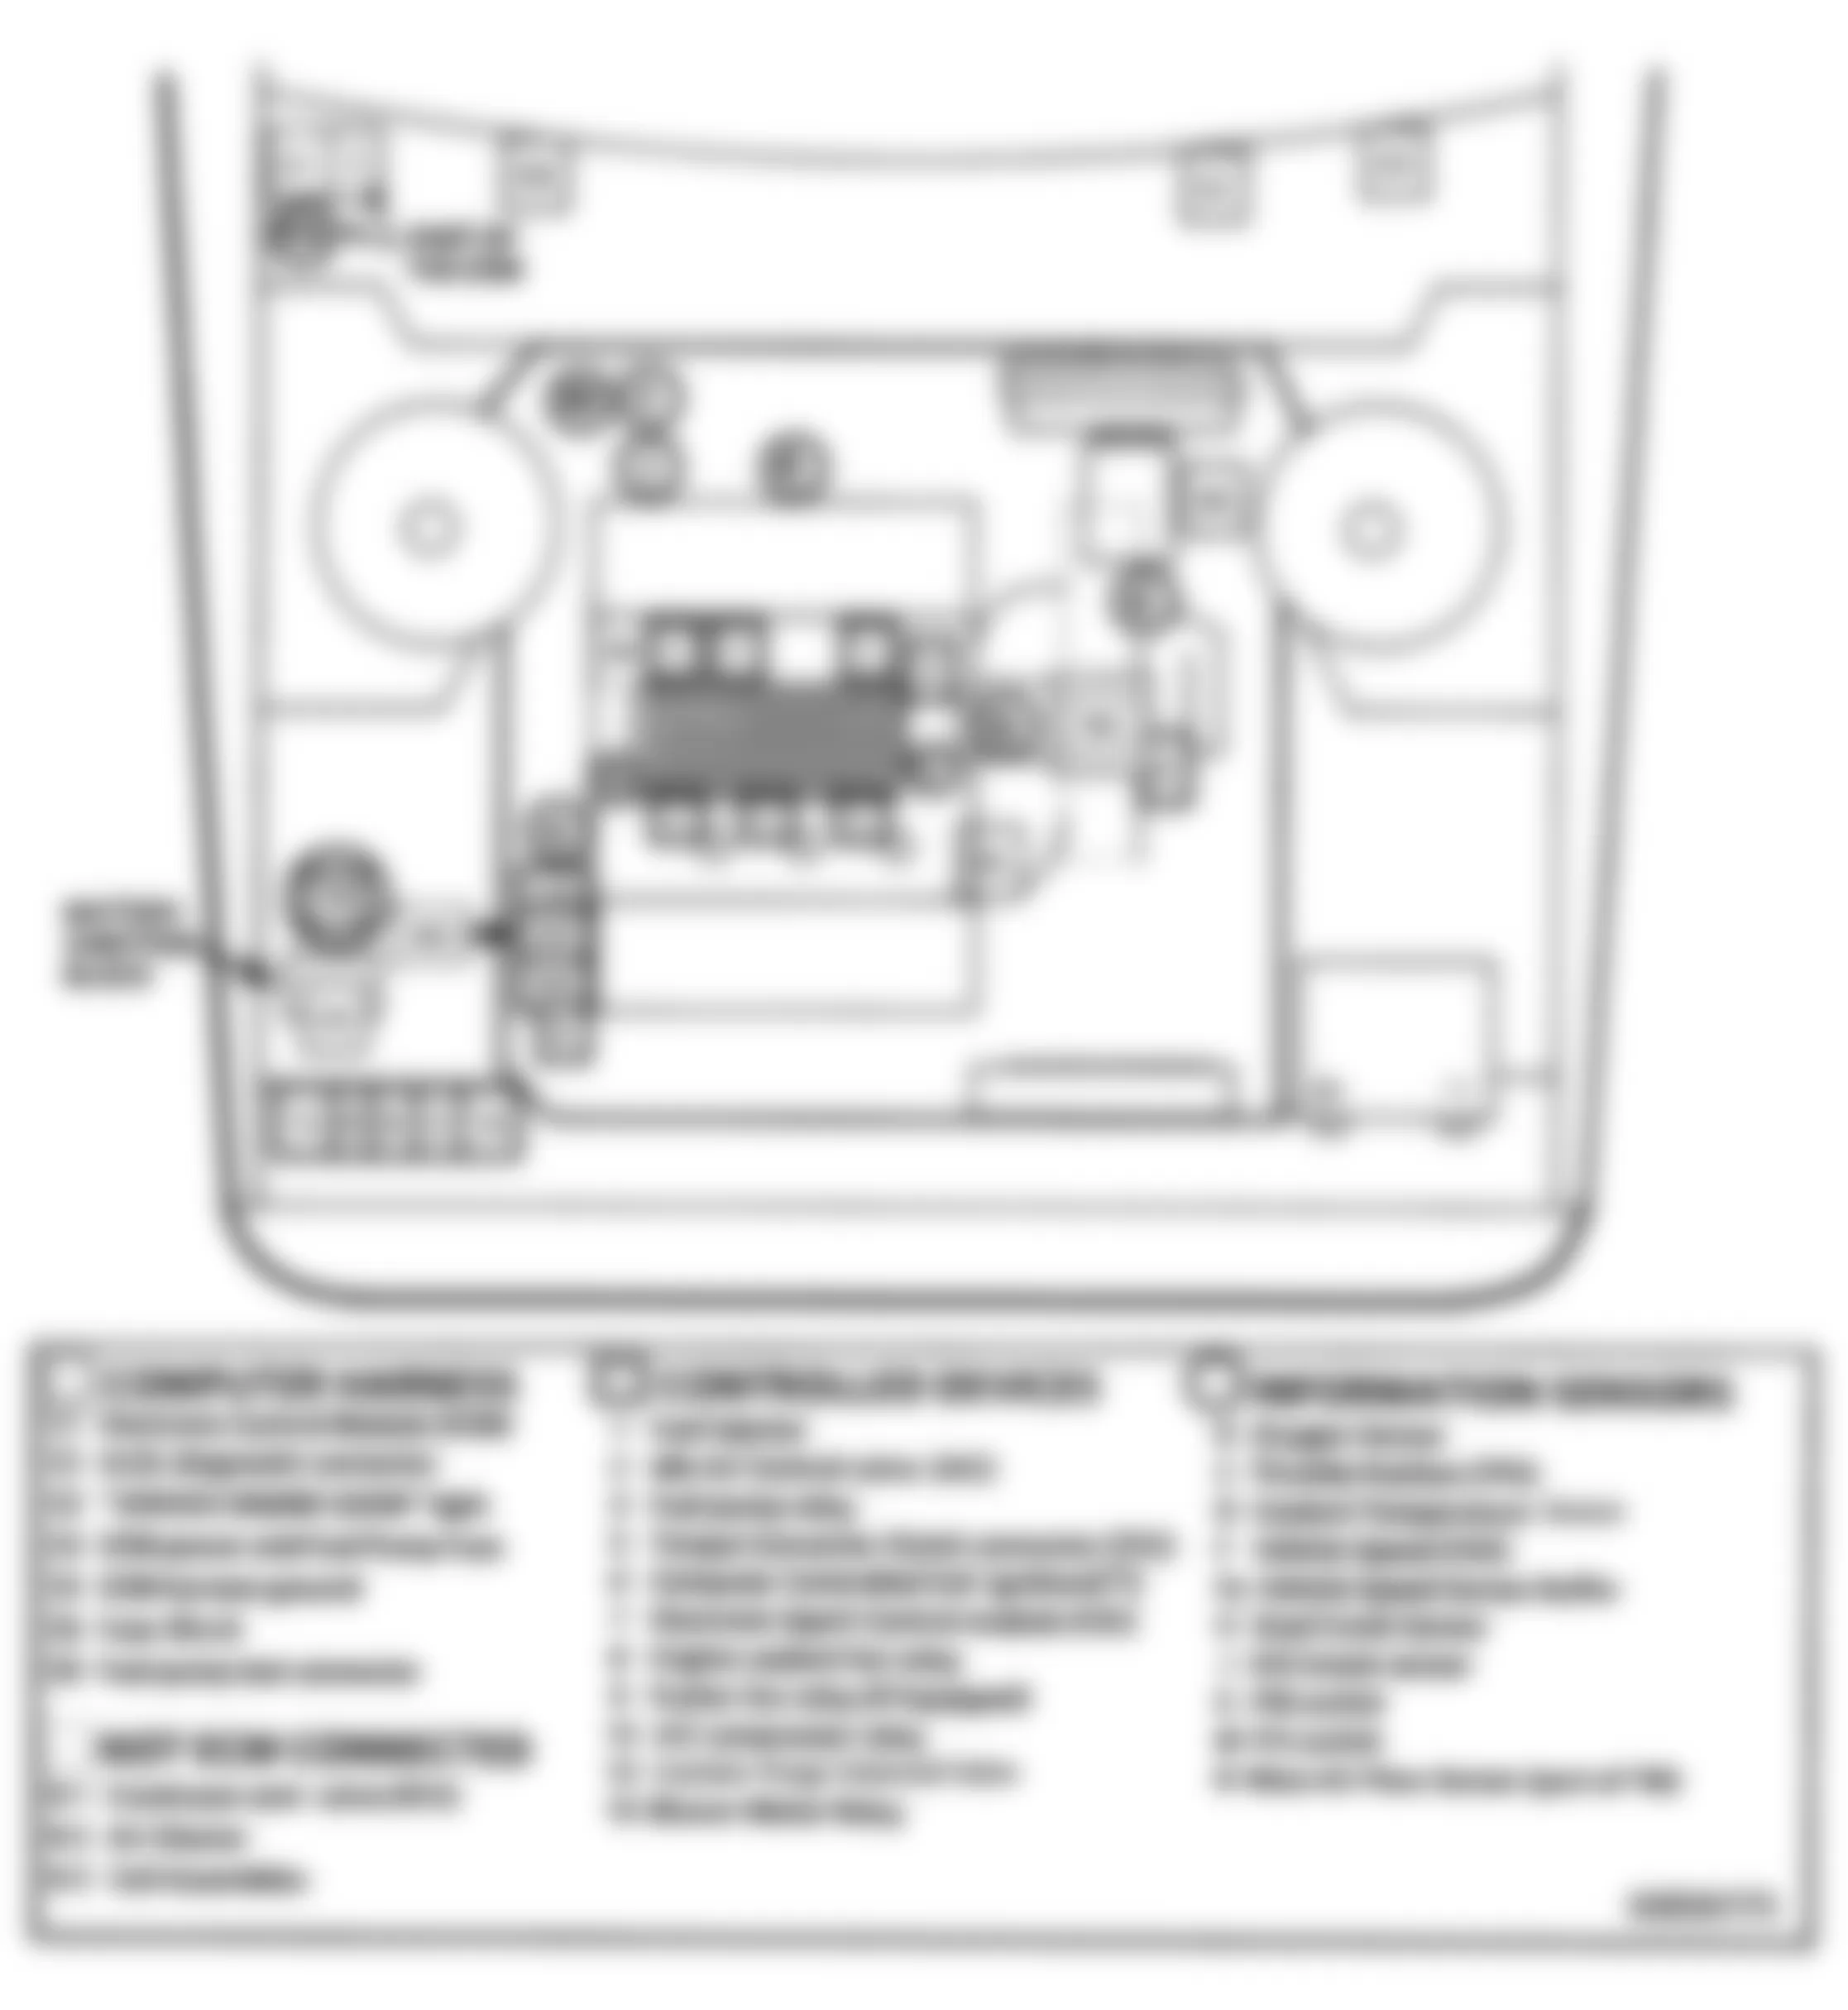 Buick Century Limited 1990 - Component Locations -  Component Locations (4 Of 6)